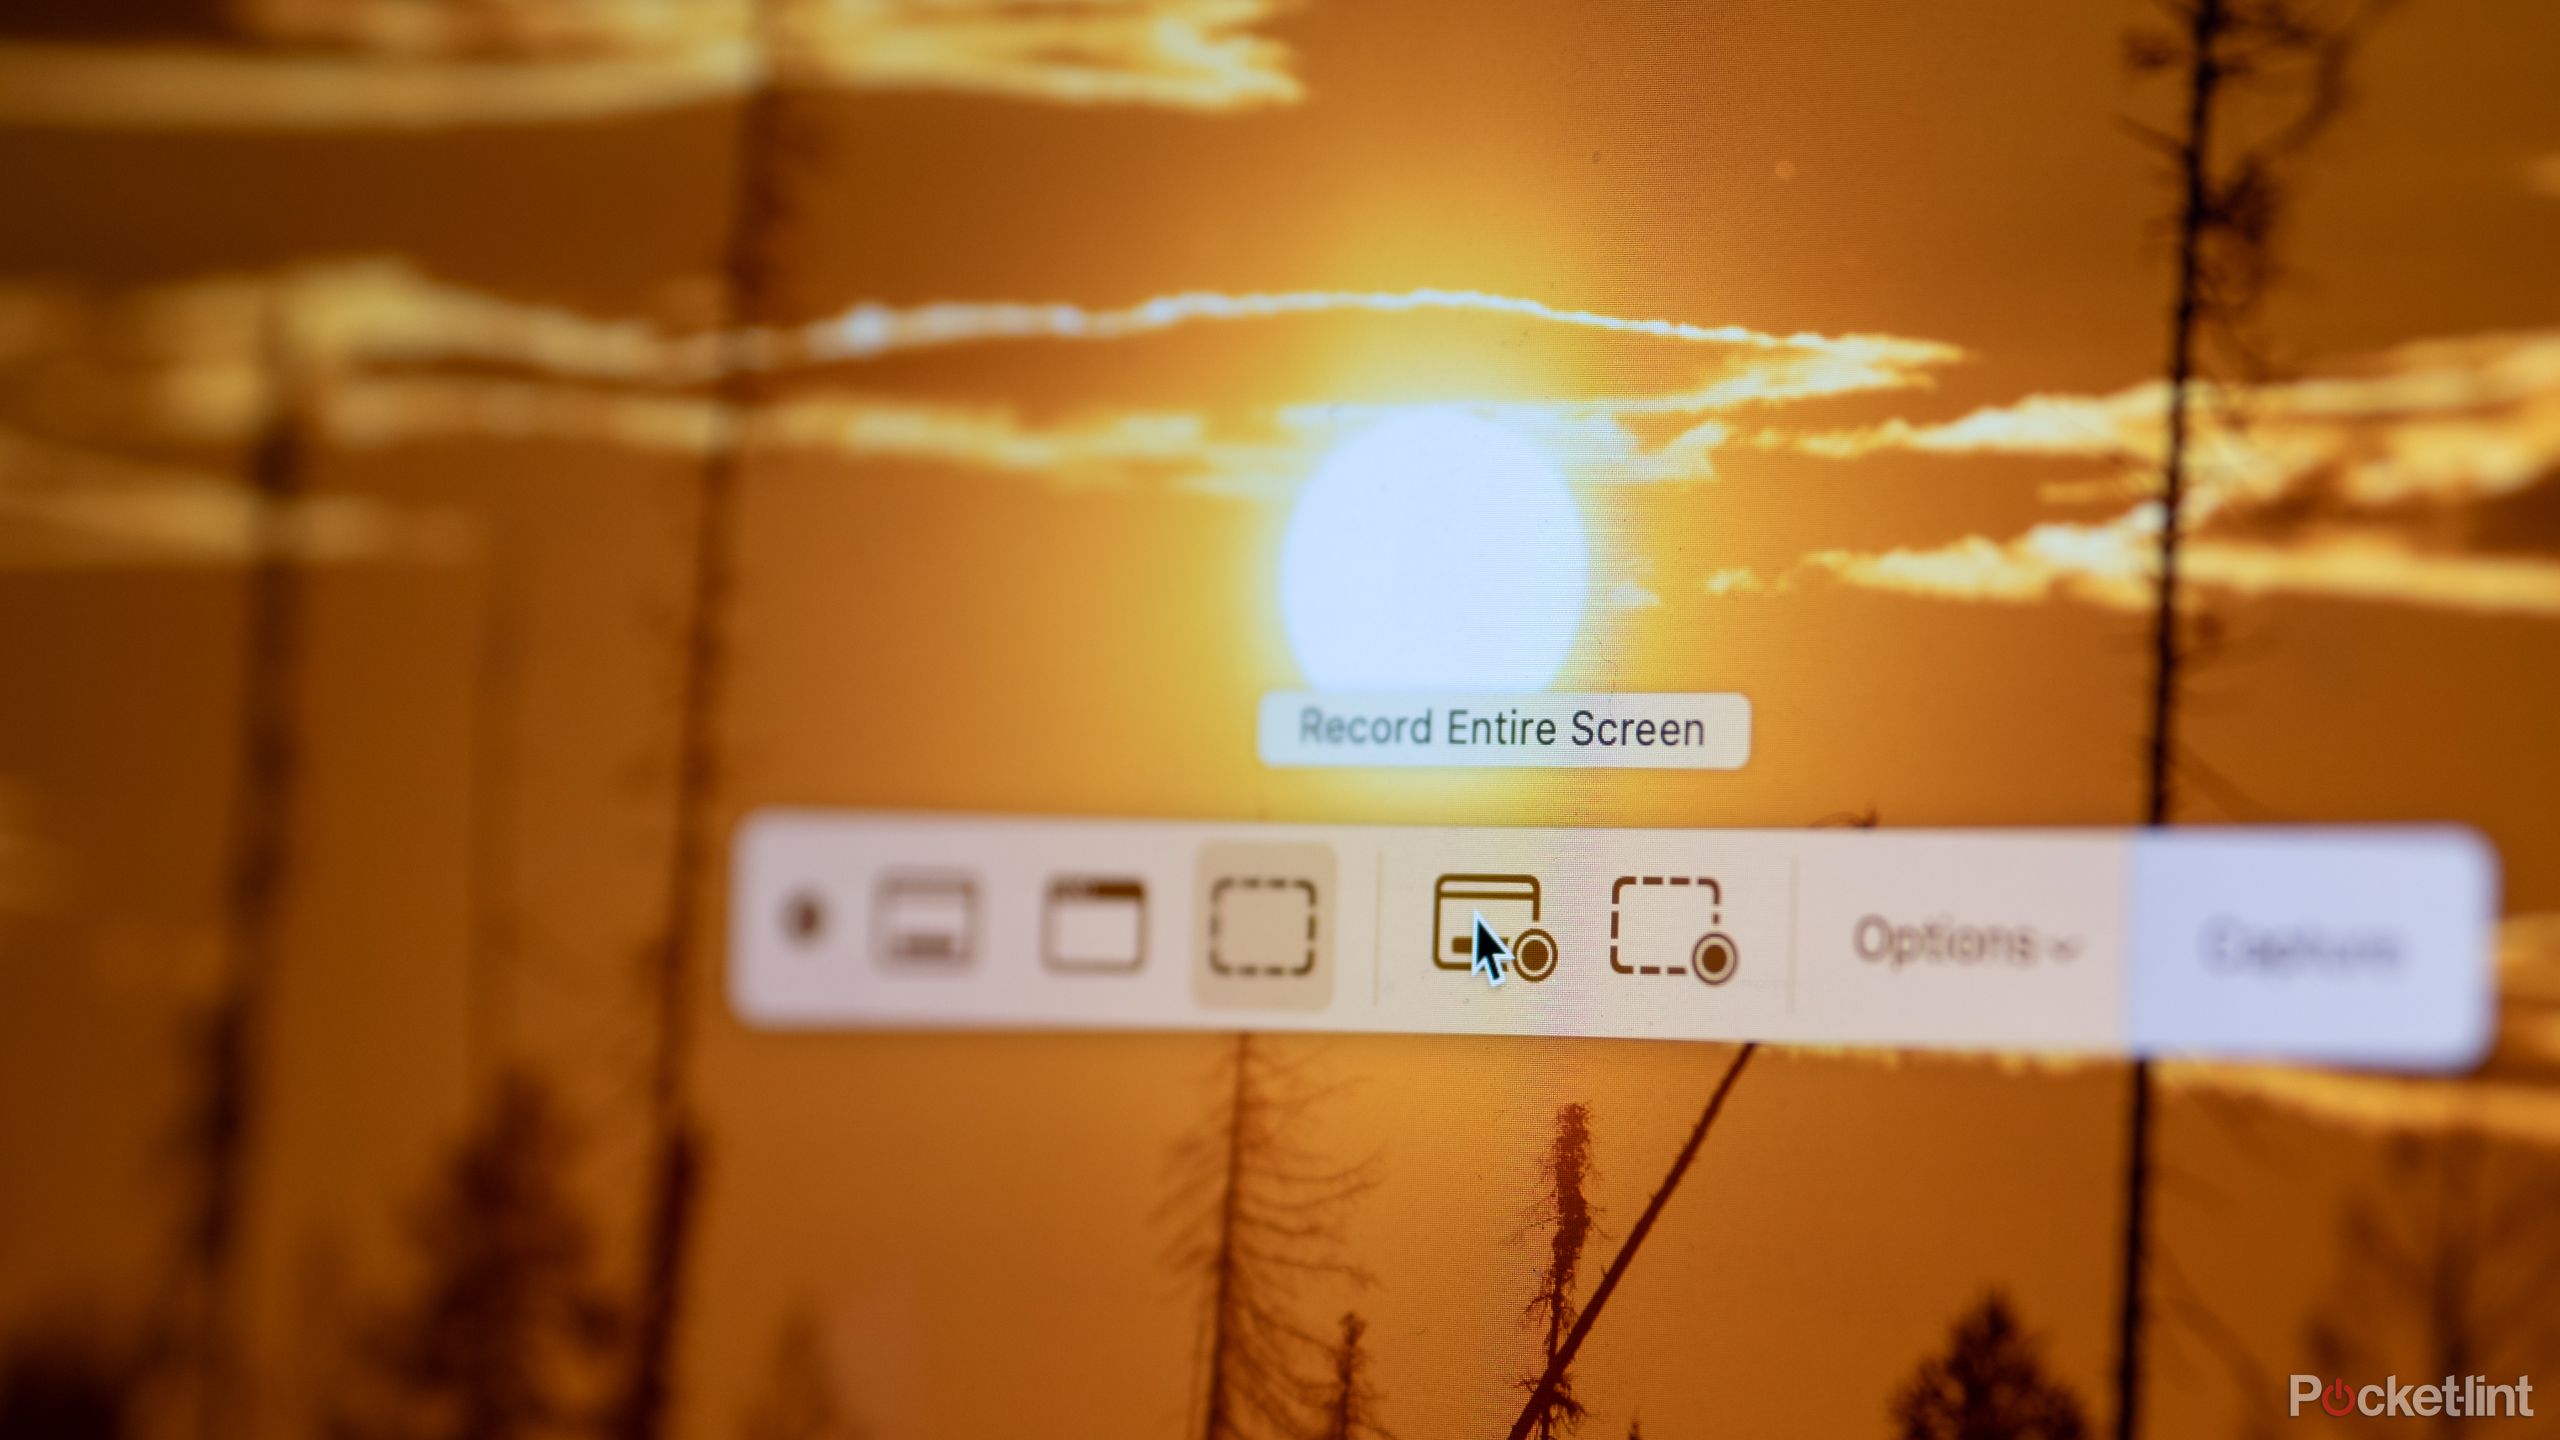 An image of the screen record tools on a MacBook